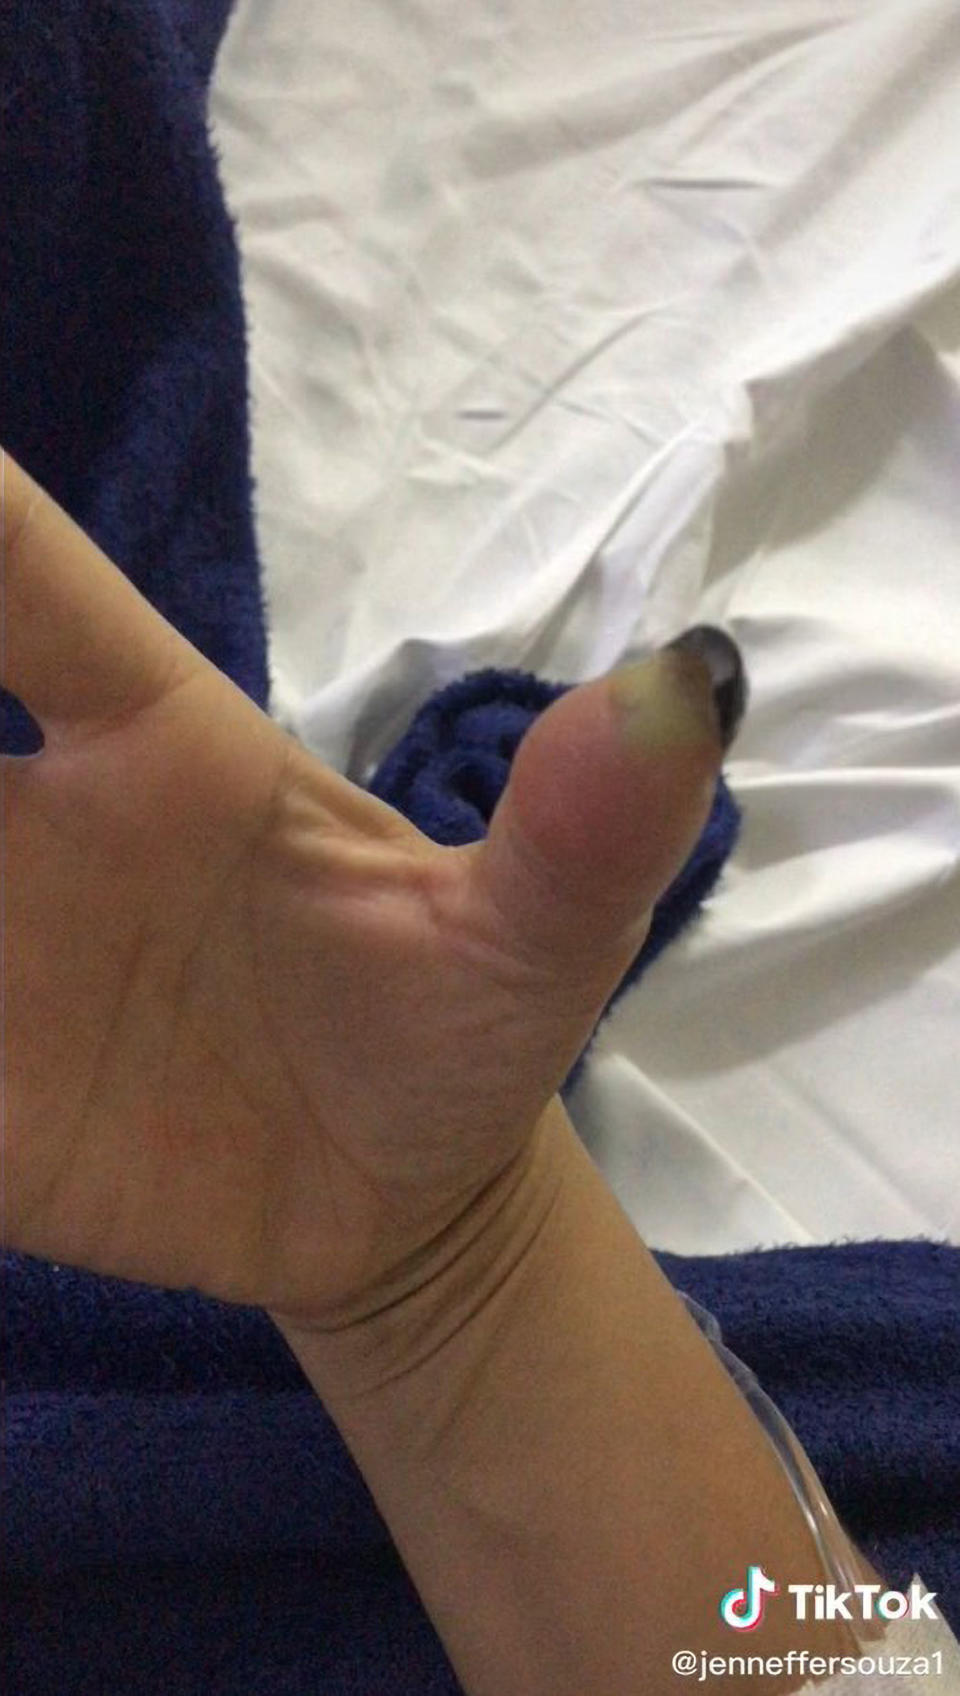 Jenneffer Souza shows her swollen and infected thumb in a TikTok video.